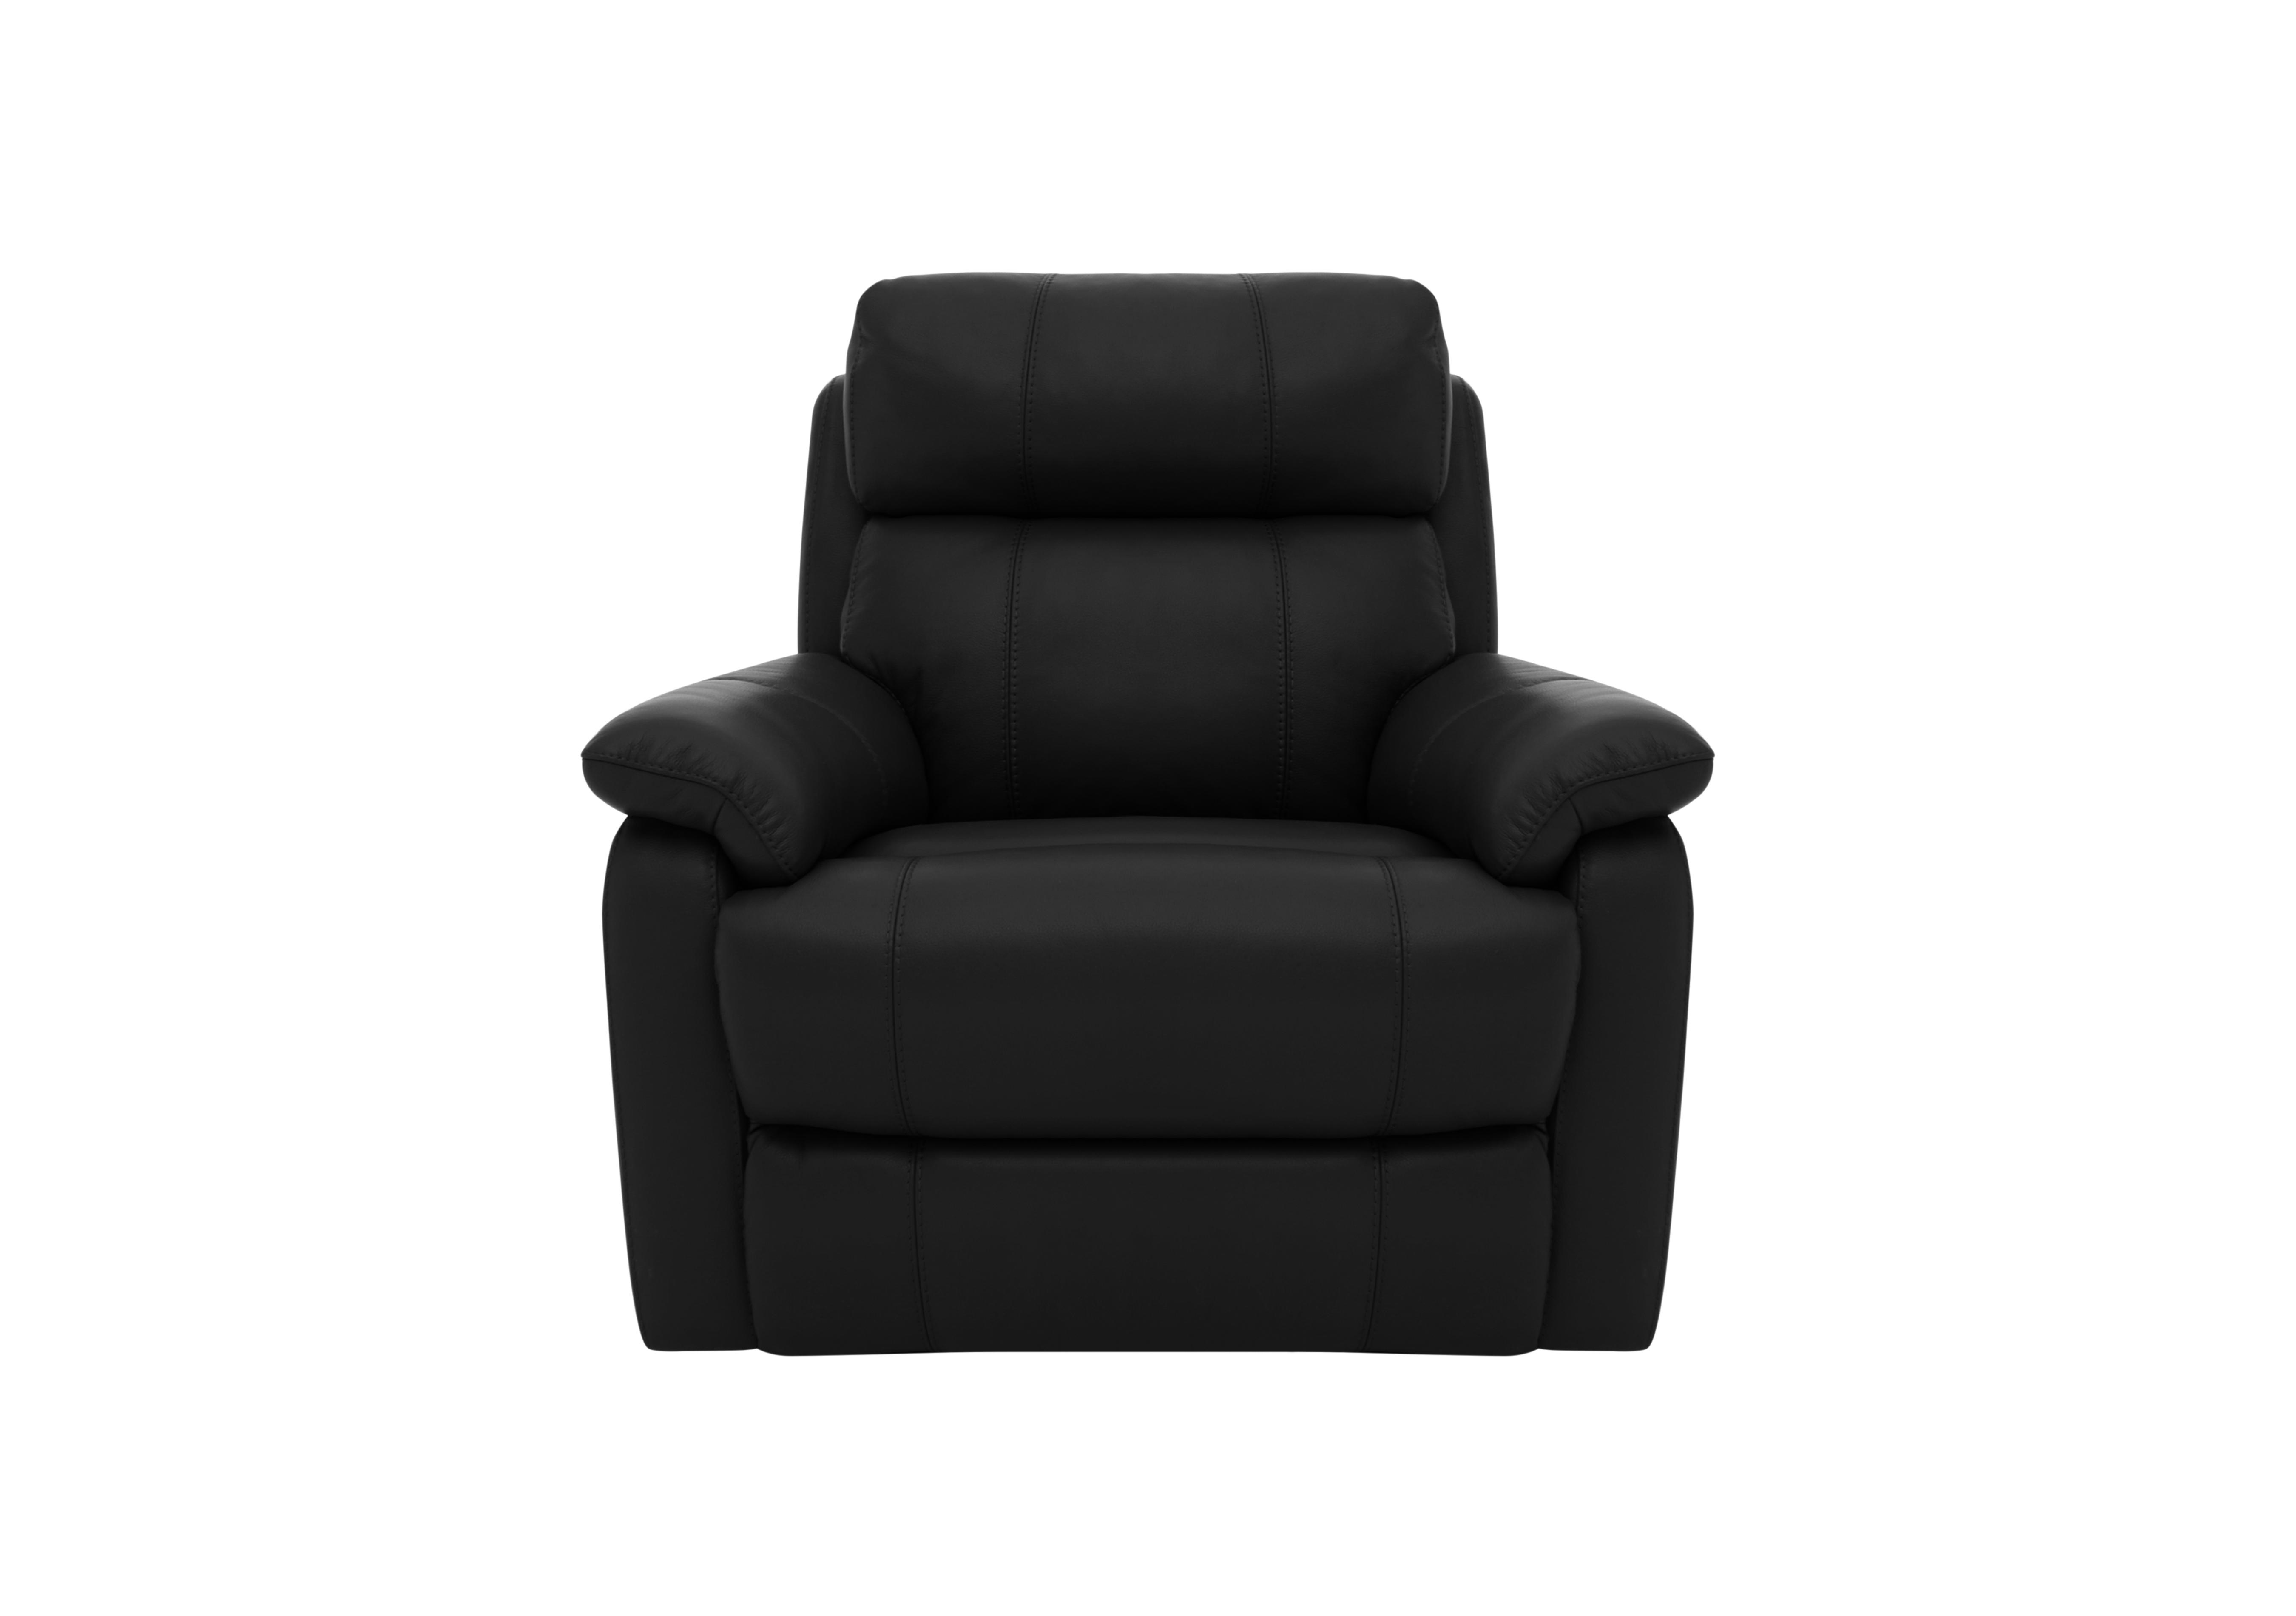 Relax Station Komodo Leather Armchair in Bv-3500 Classic Black on Furniture Village